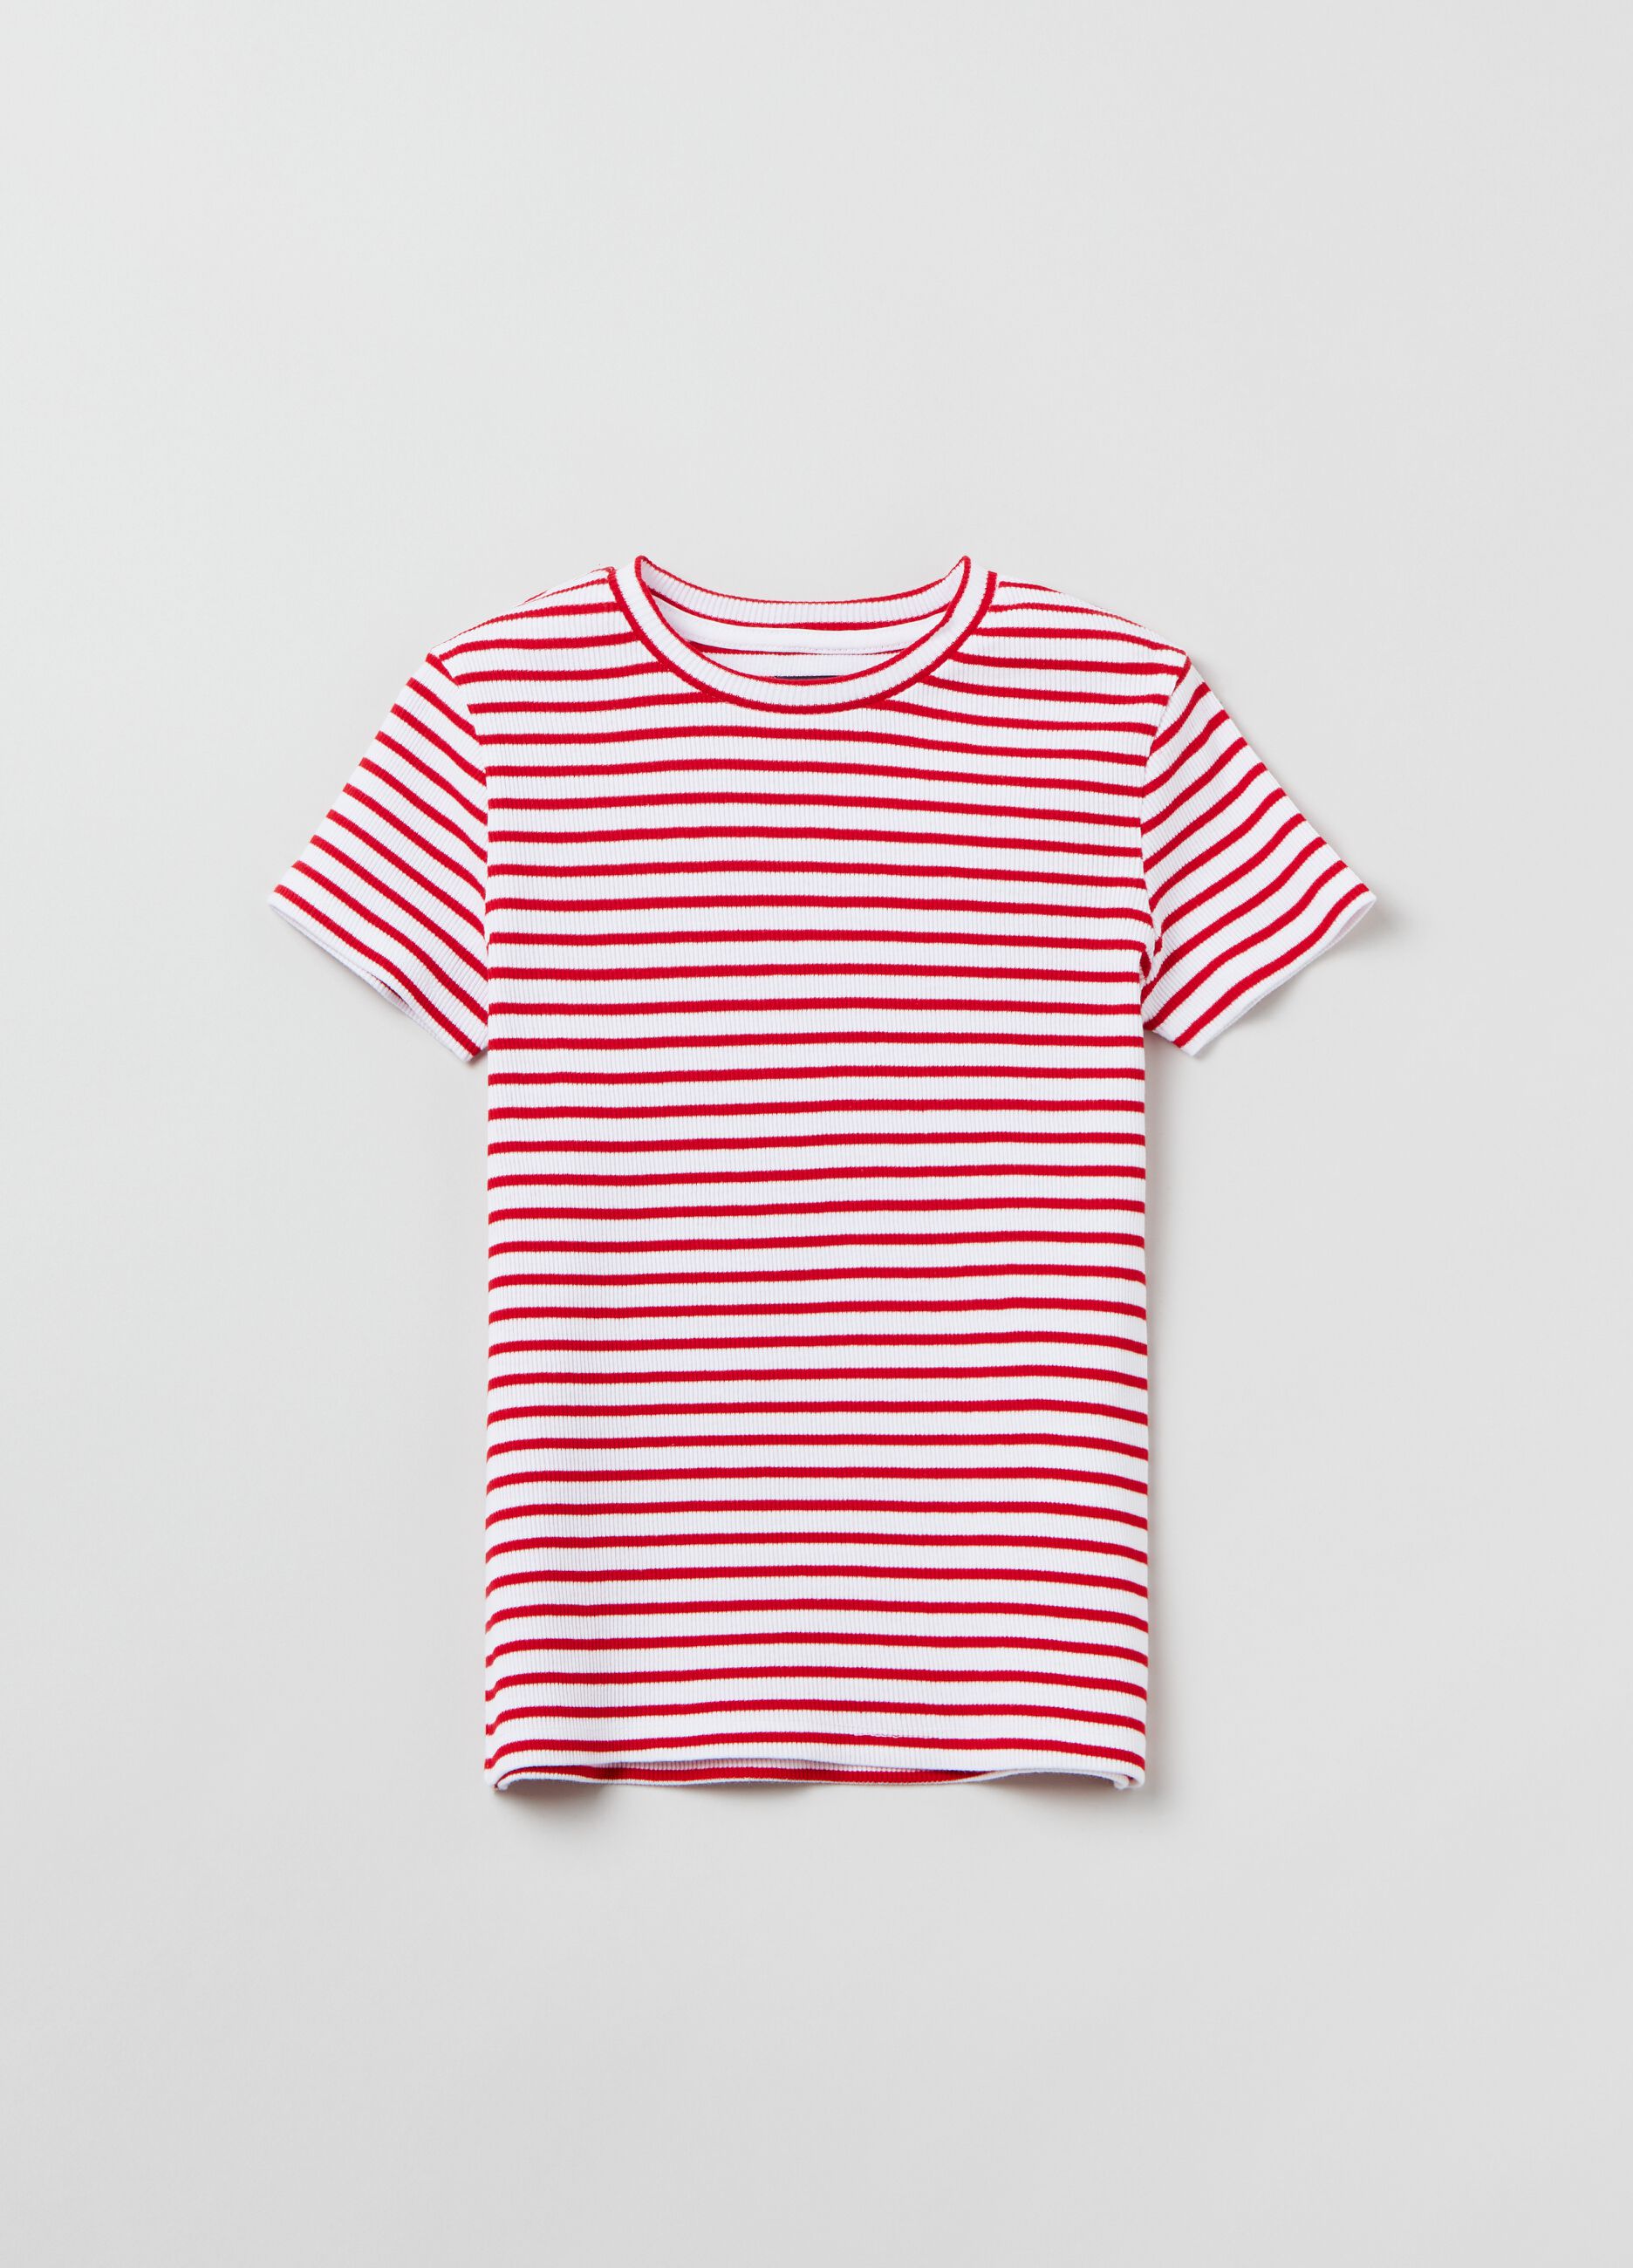 Ribbed T-shirt with striped pattern